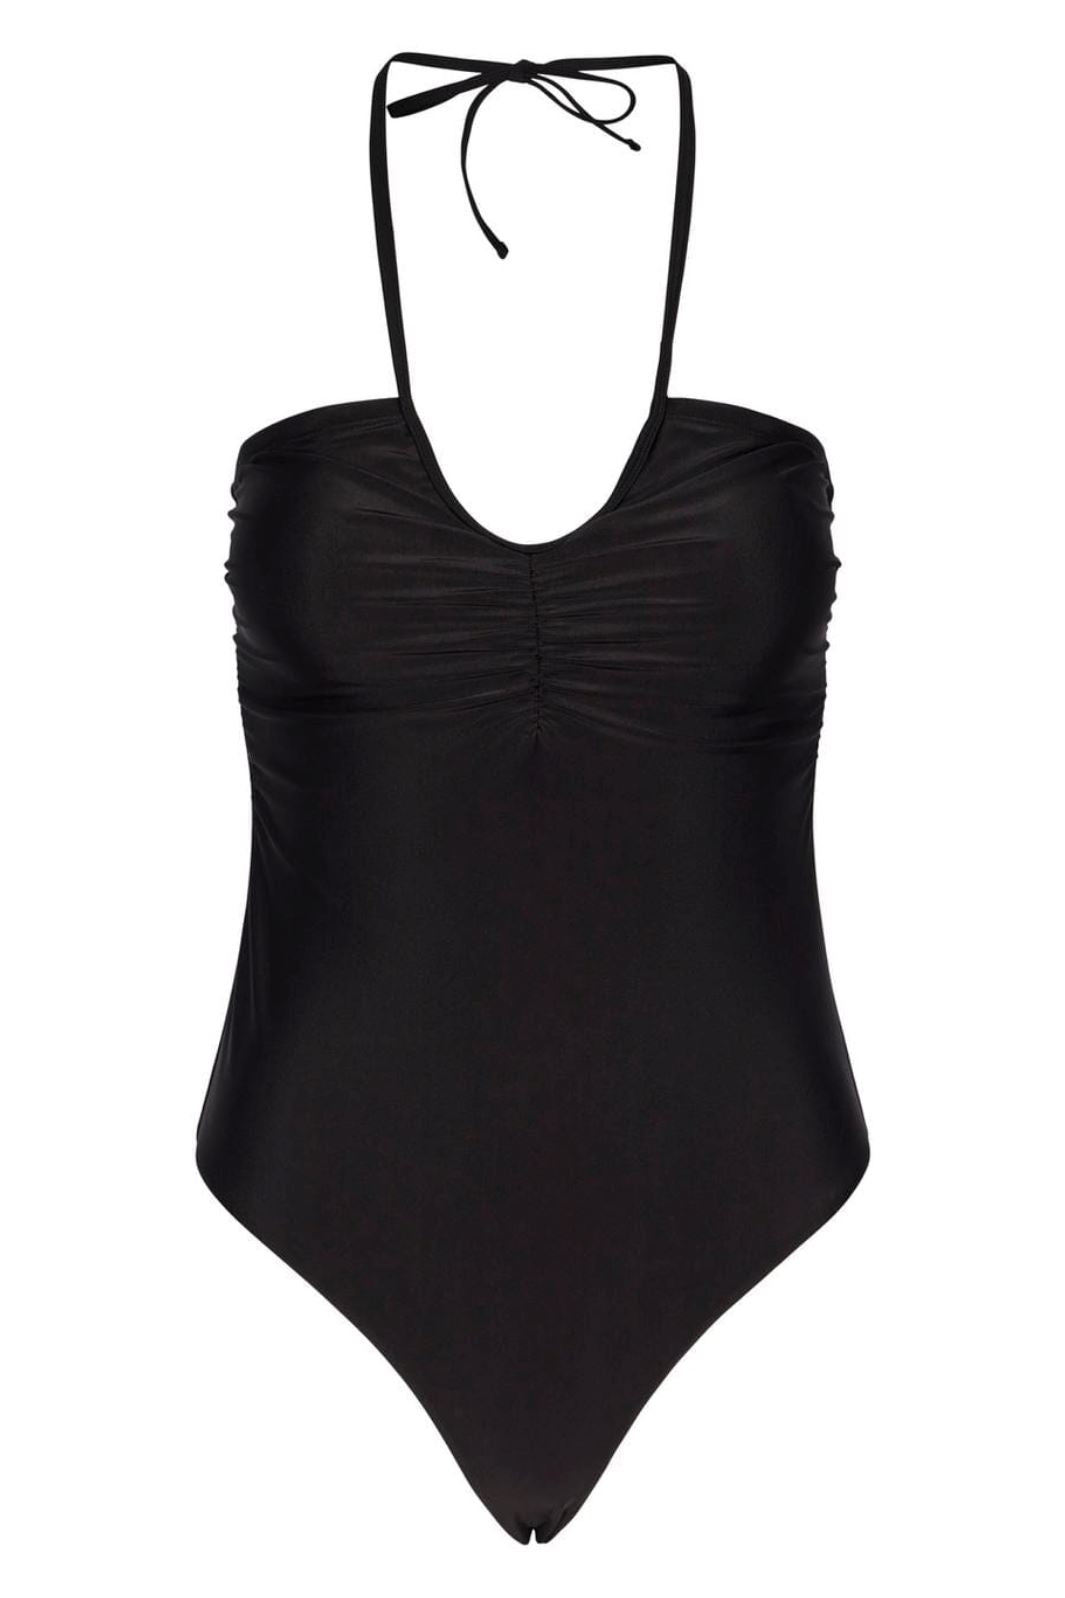 Pieces - Pcayda Swimsuit Sww - 4429502 Black Onyx Badedragter 